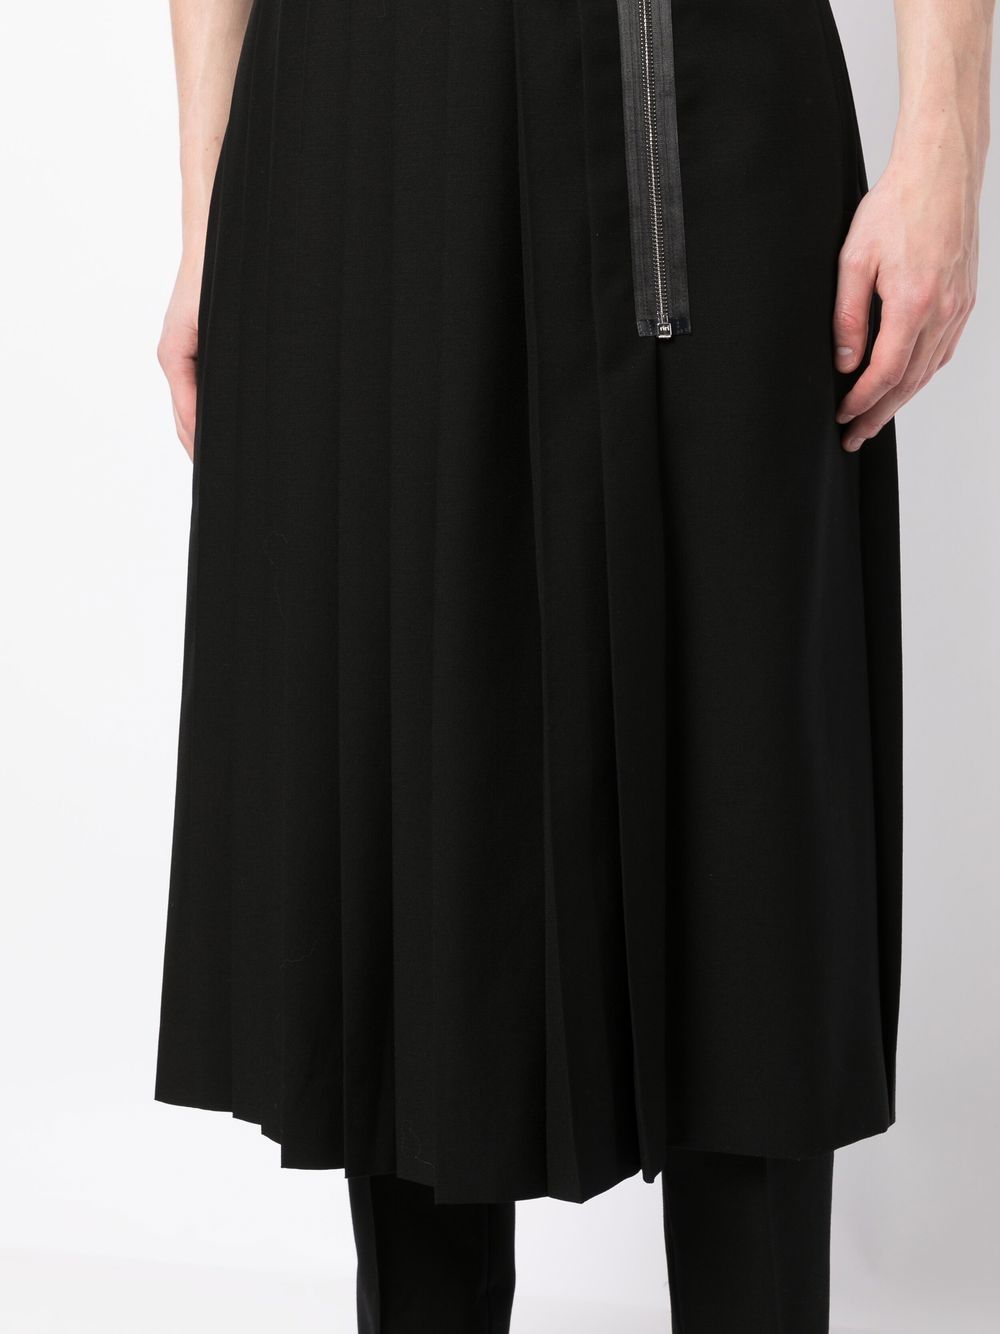 Undercover Layered Kilt Trousers - Farfetch